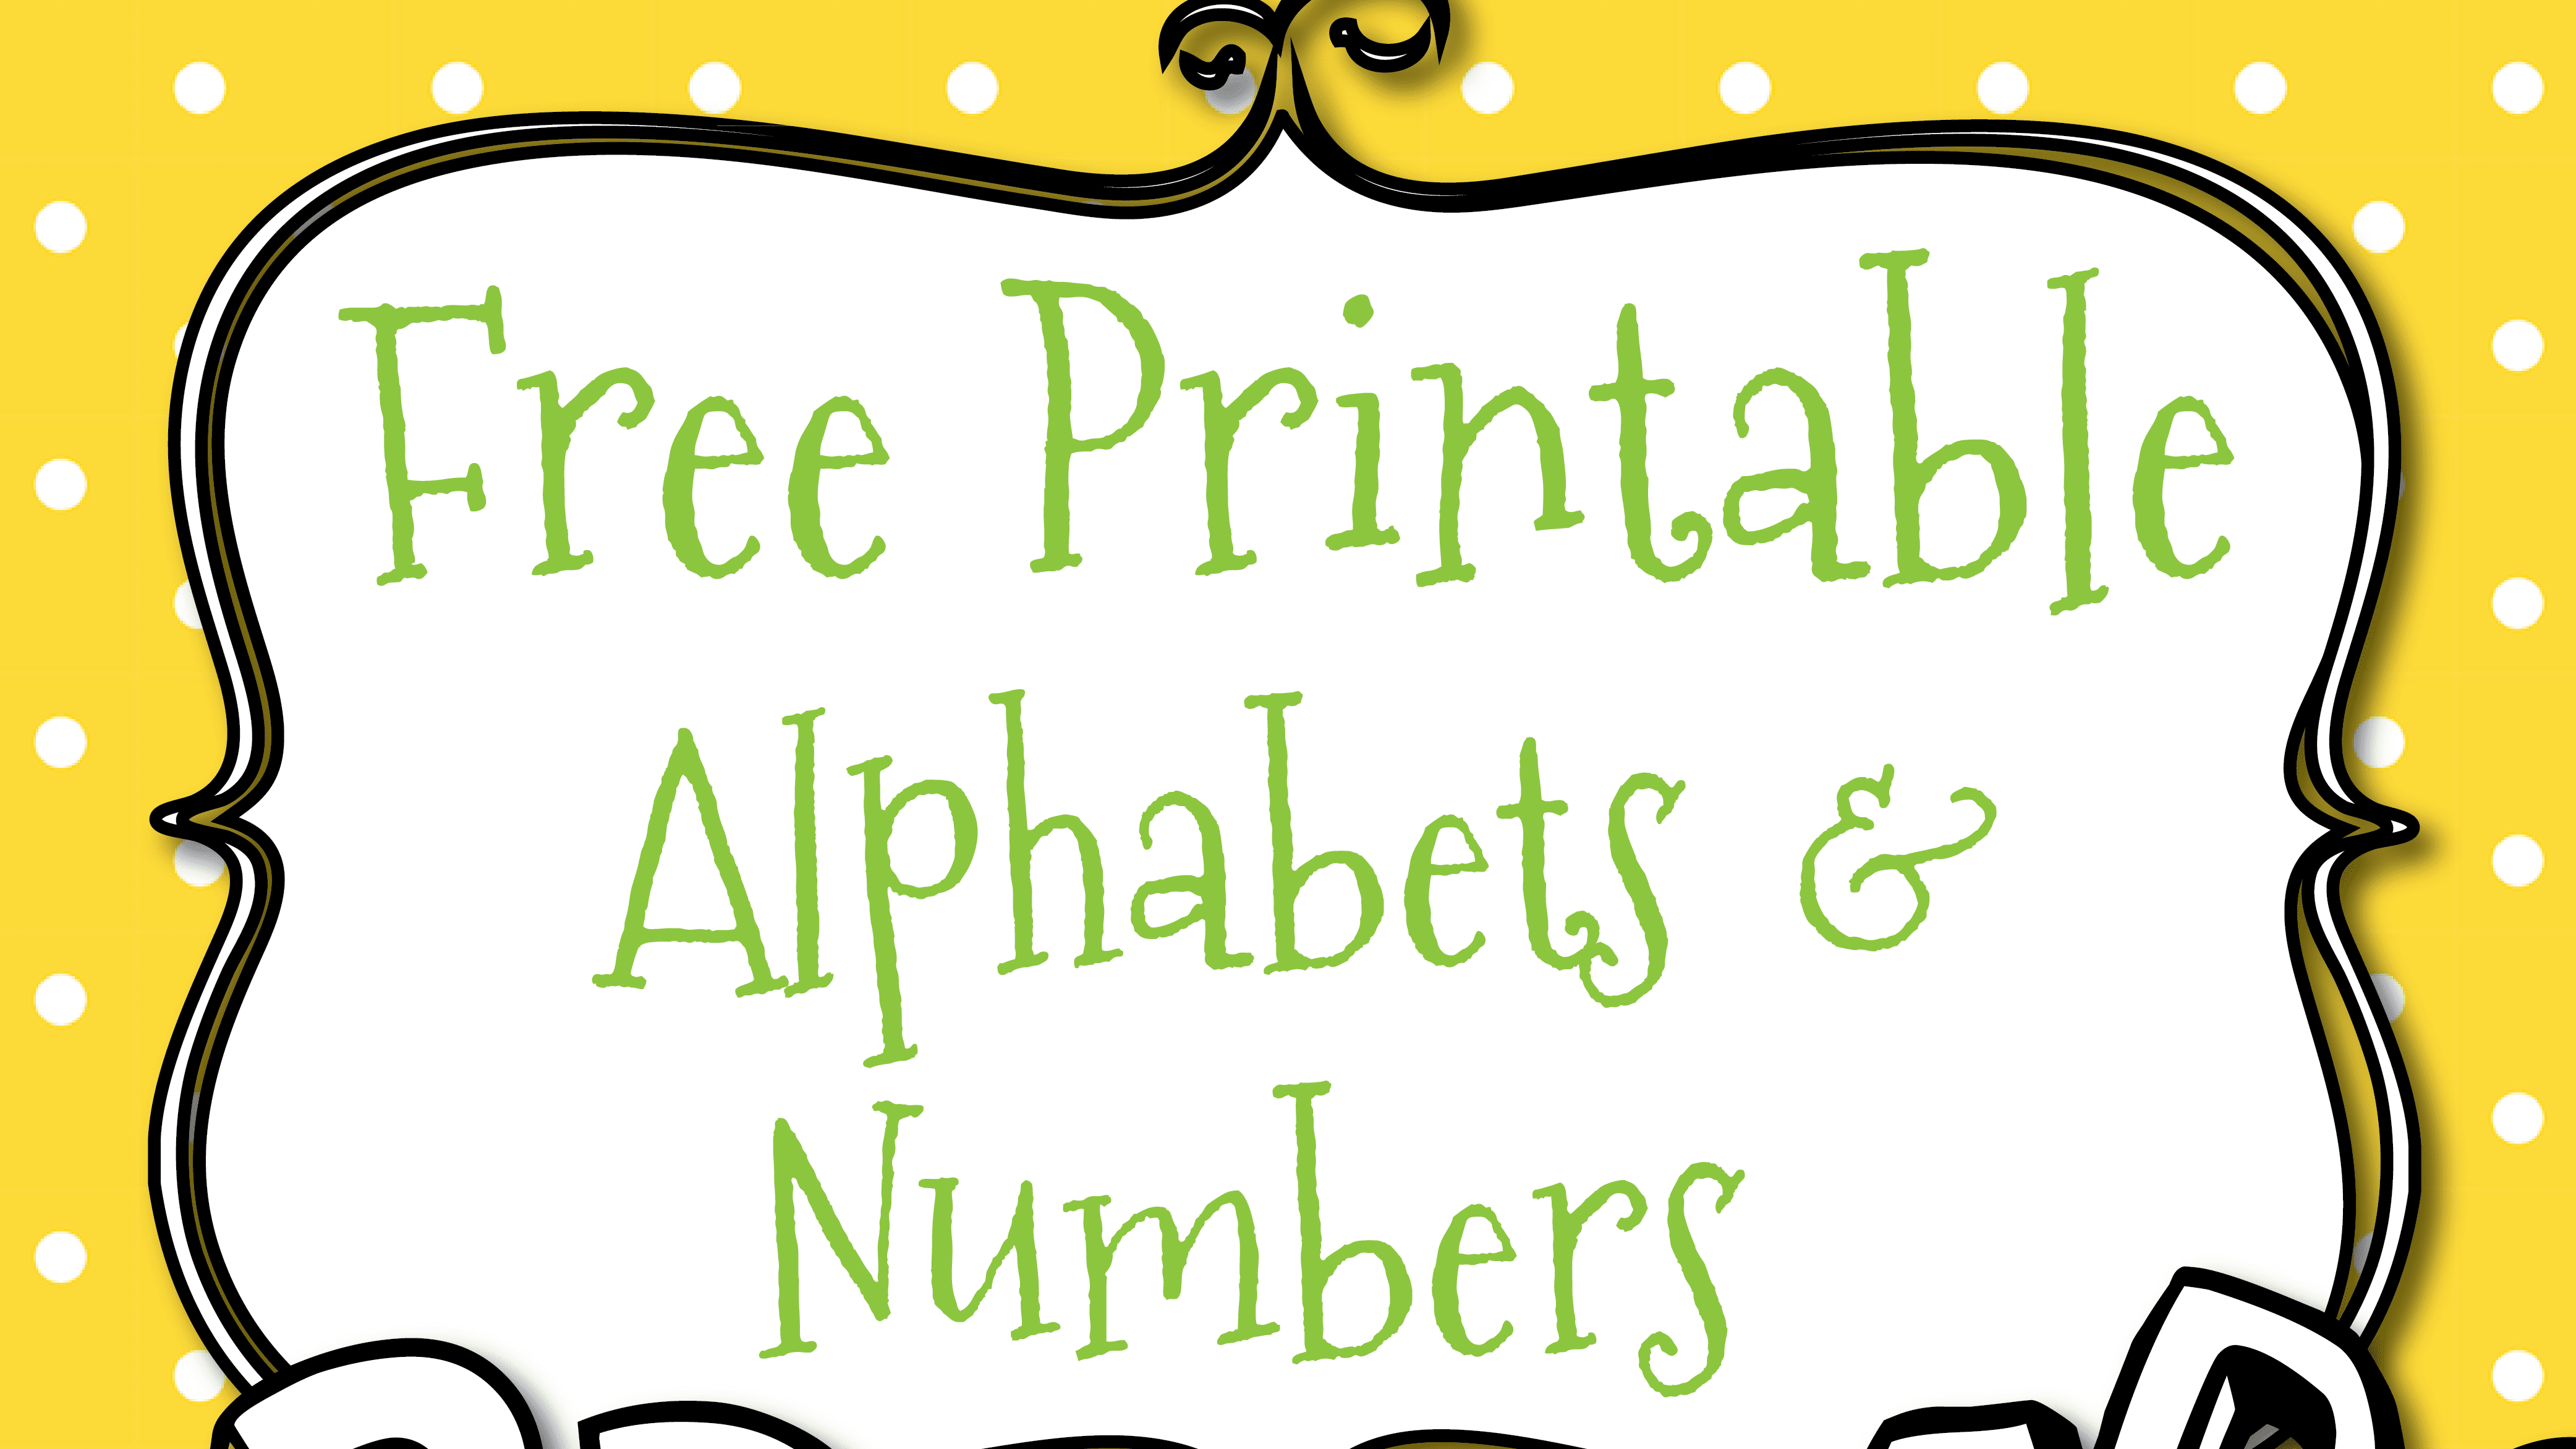 Free Printable Letters And Numbers For Crafts - Free Printable Alphabet Templates